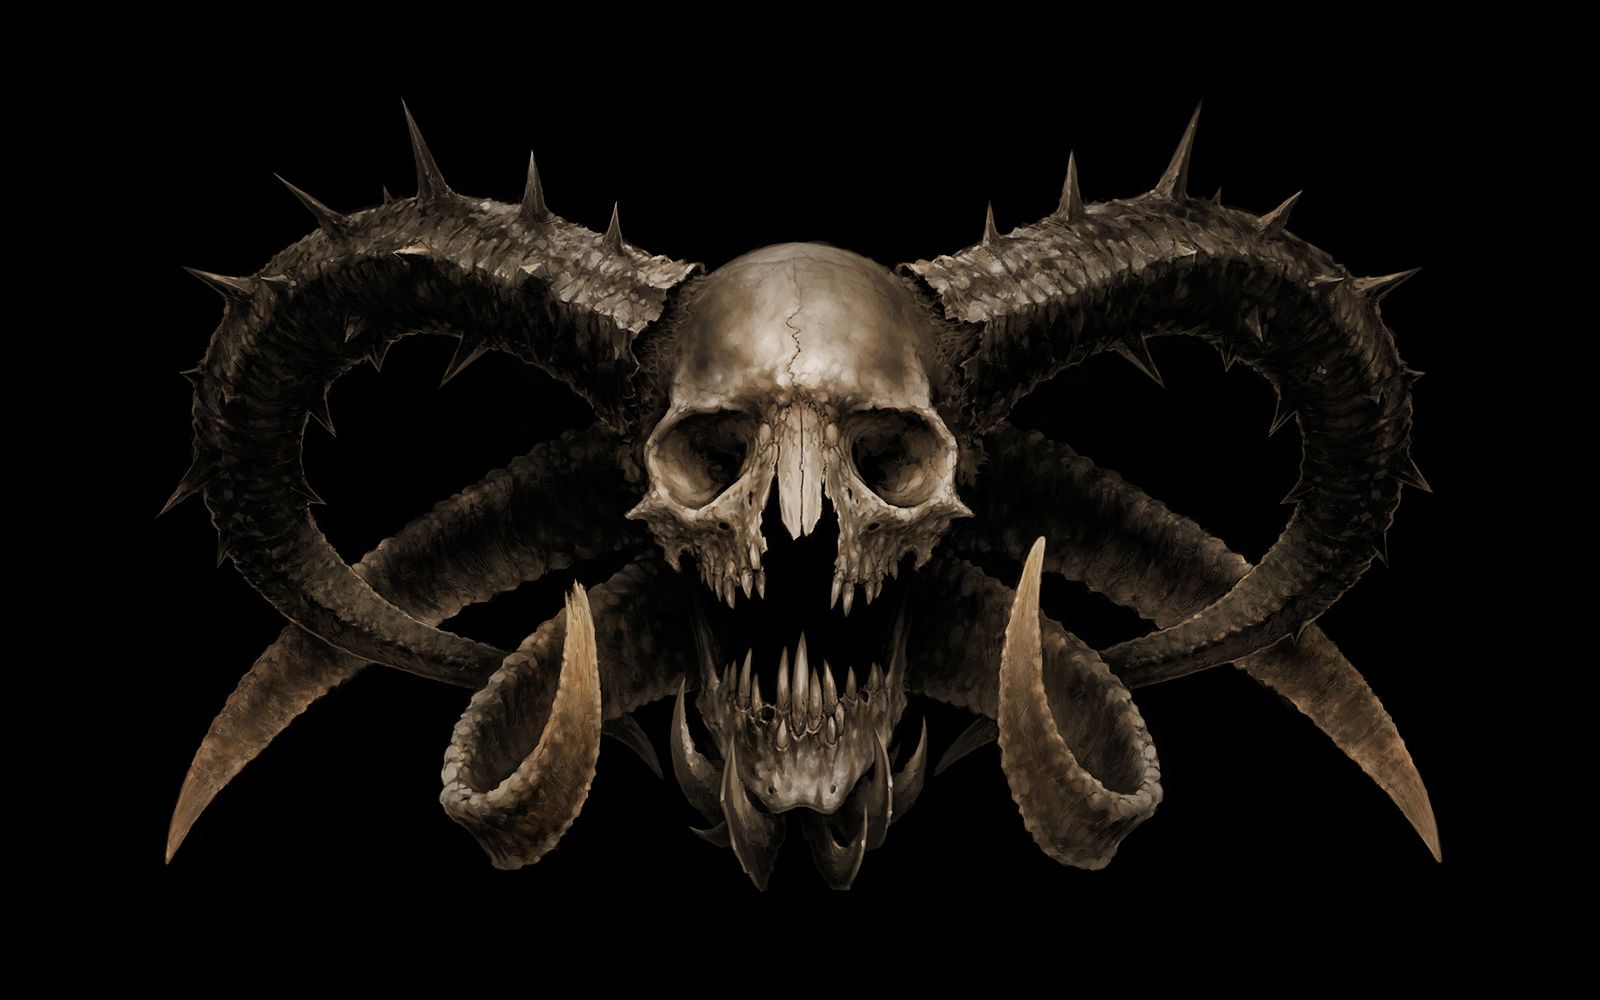 Cool Skull Wallpapers images